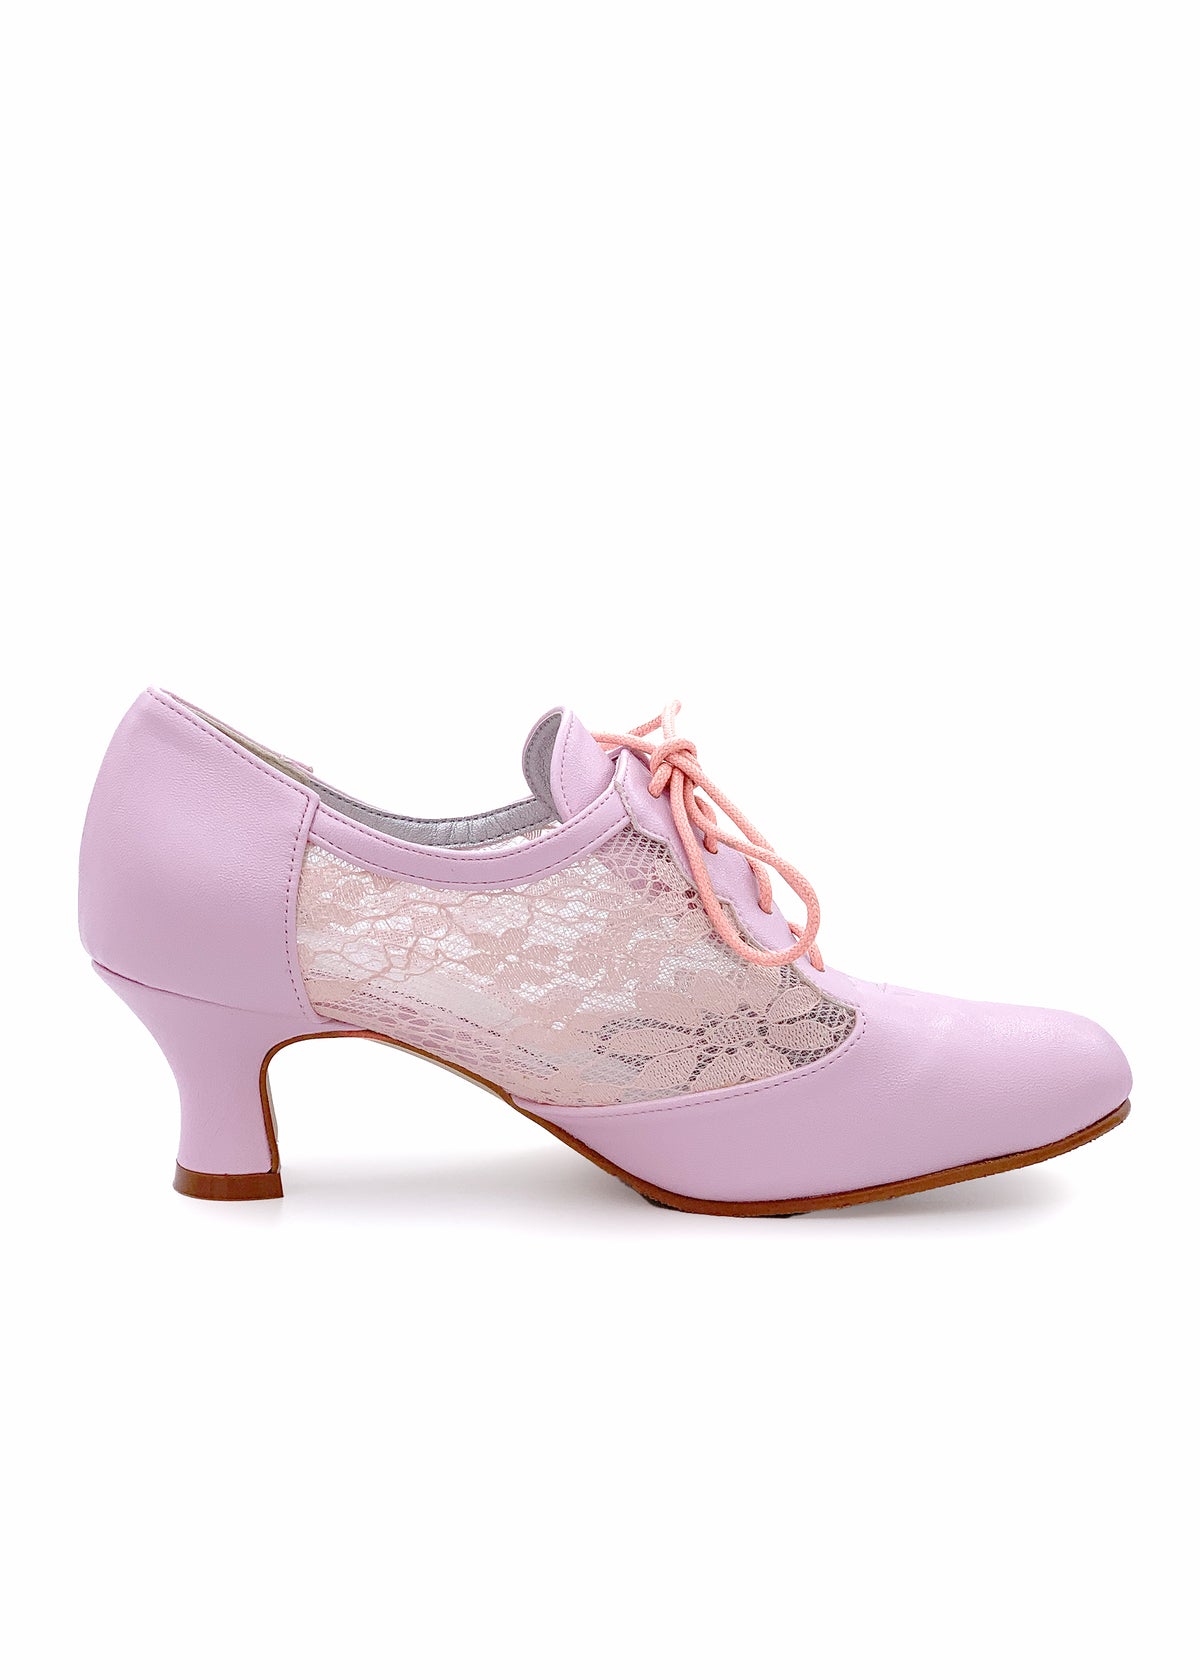 Party Walking shoes with a low heel - pink, lace sides